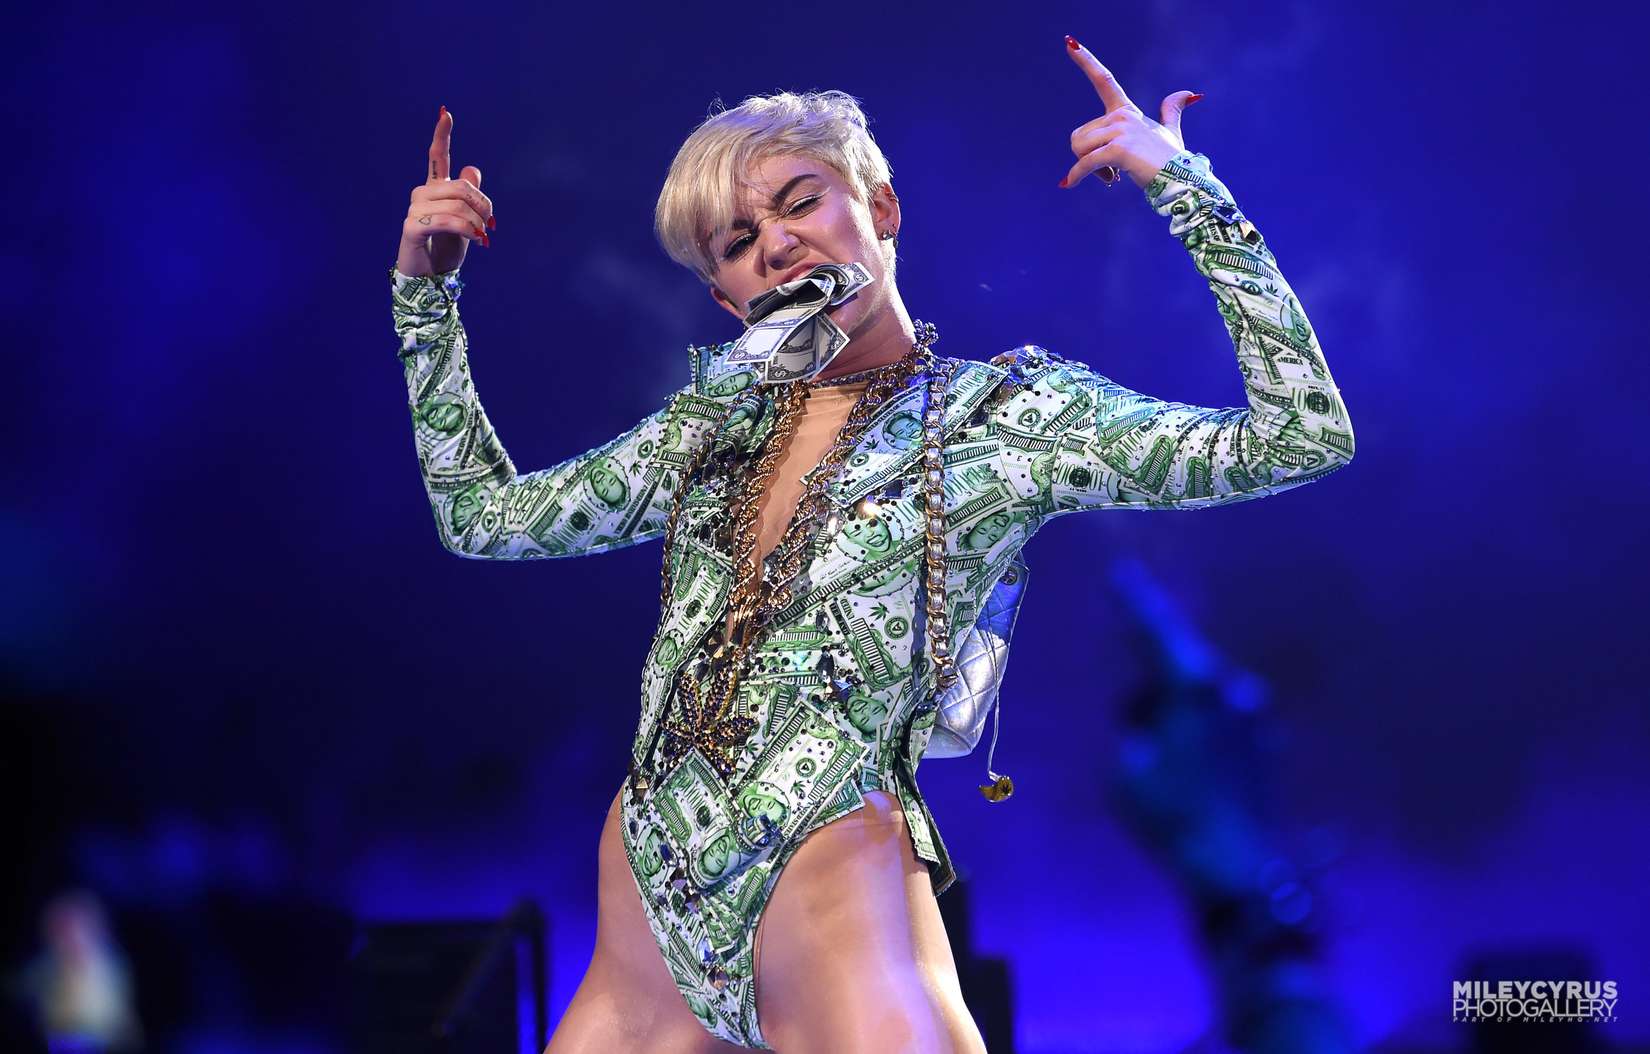 miley cyrus going on tour